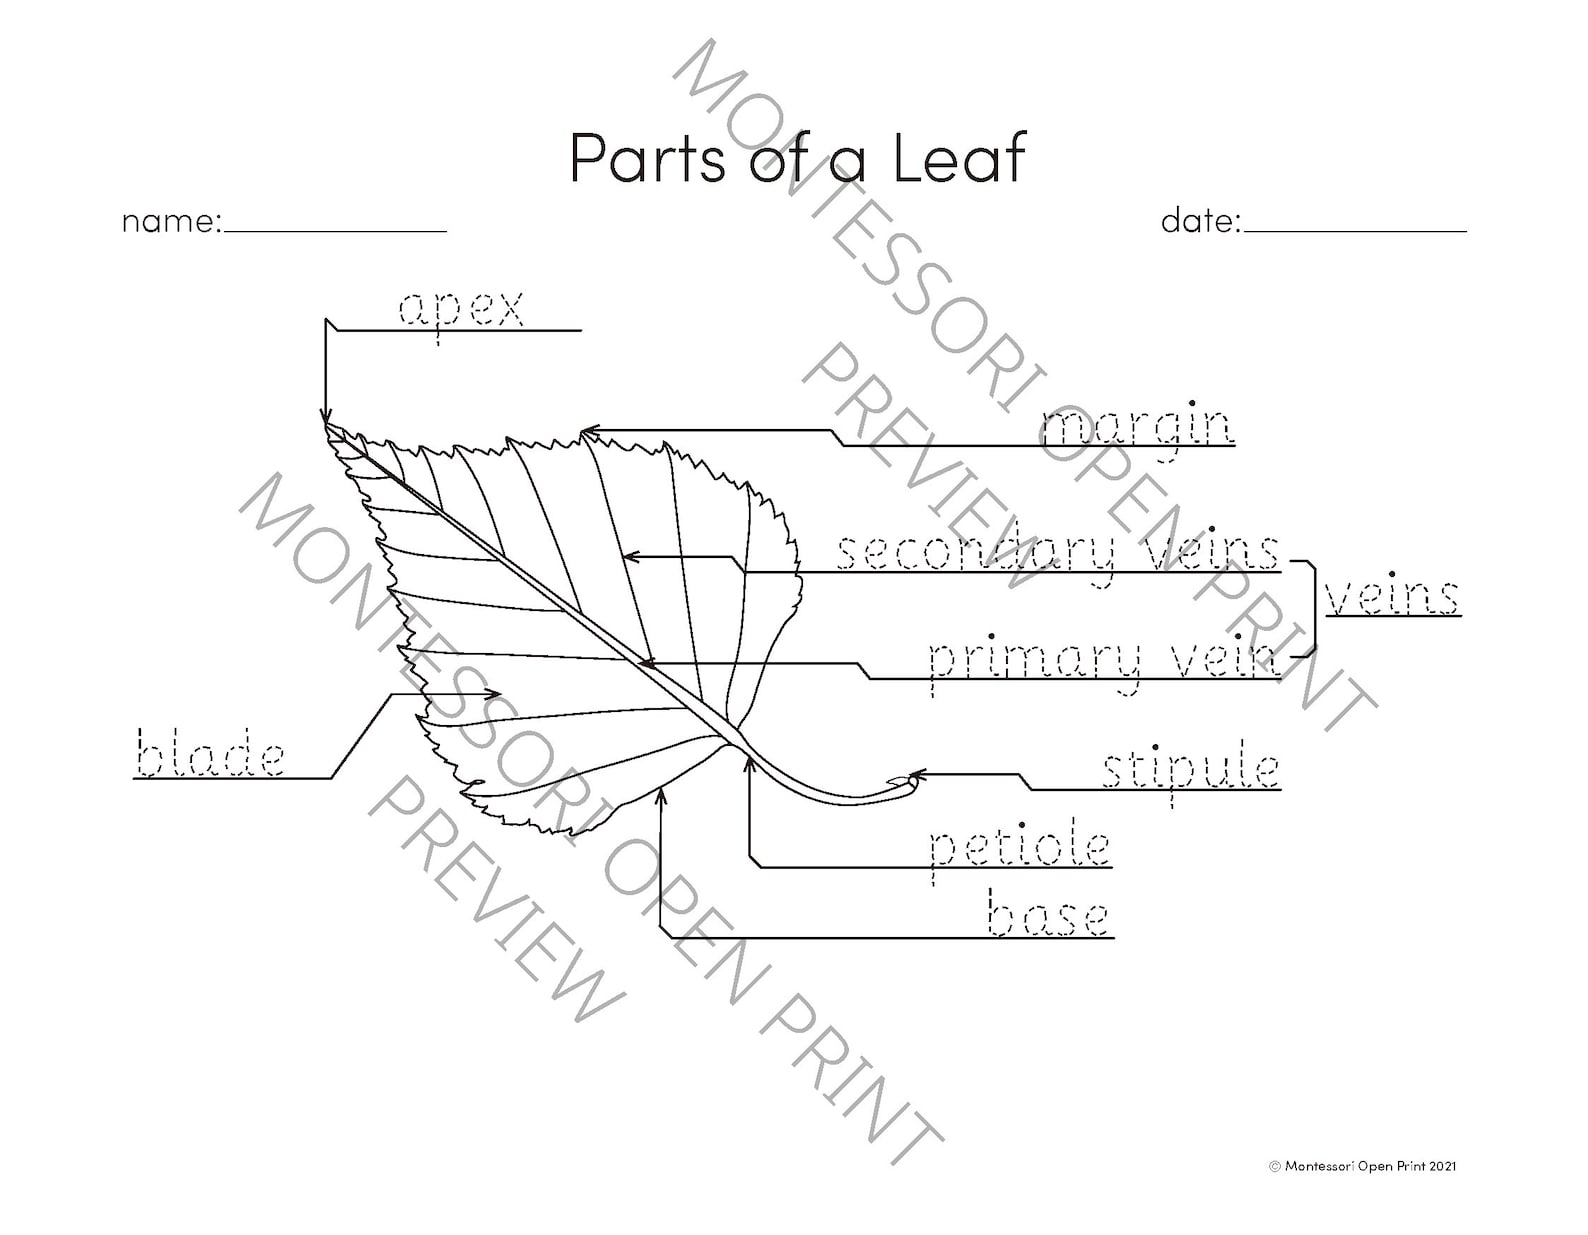 Montessori 3 Part Cards Parts of a Leaf - Etsy